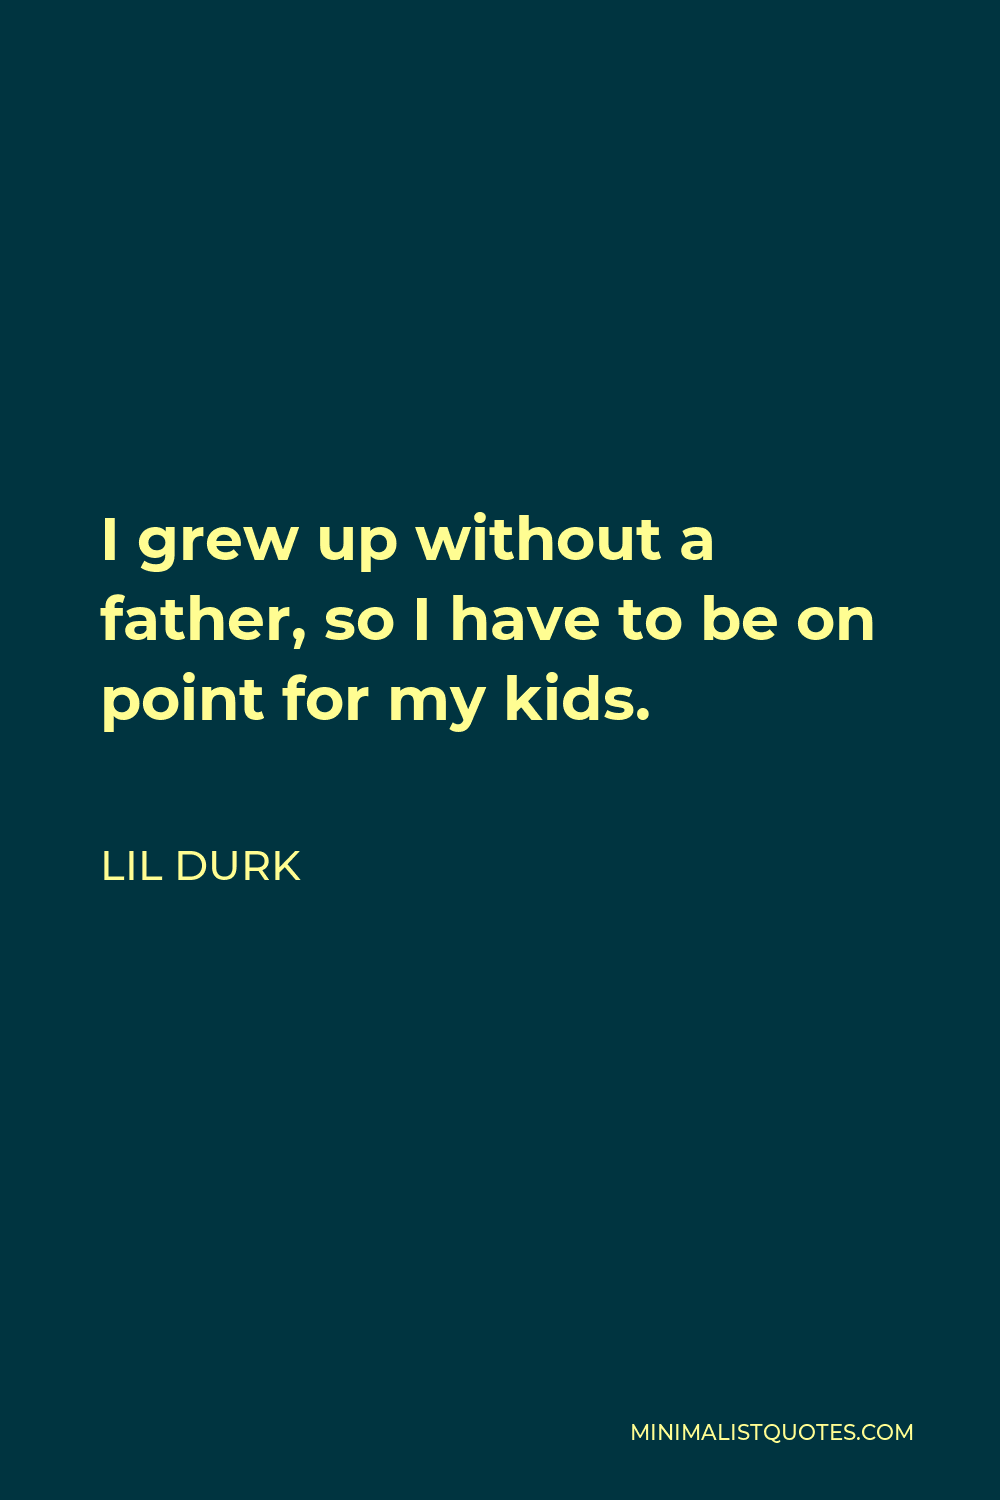 Lil Durk Quote - I grew up without a father, so I have to be on point for my kids.